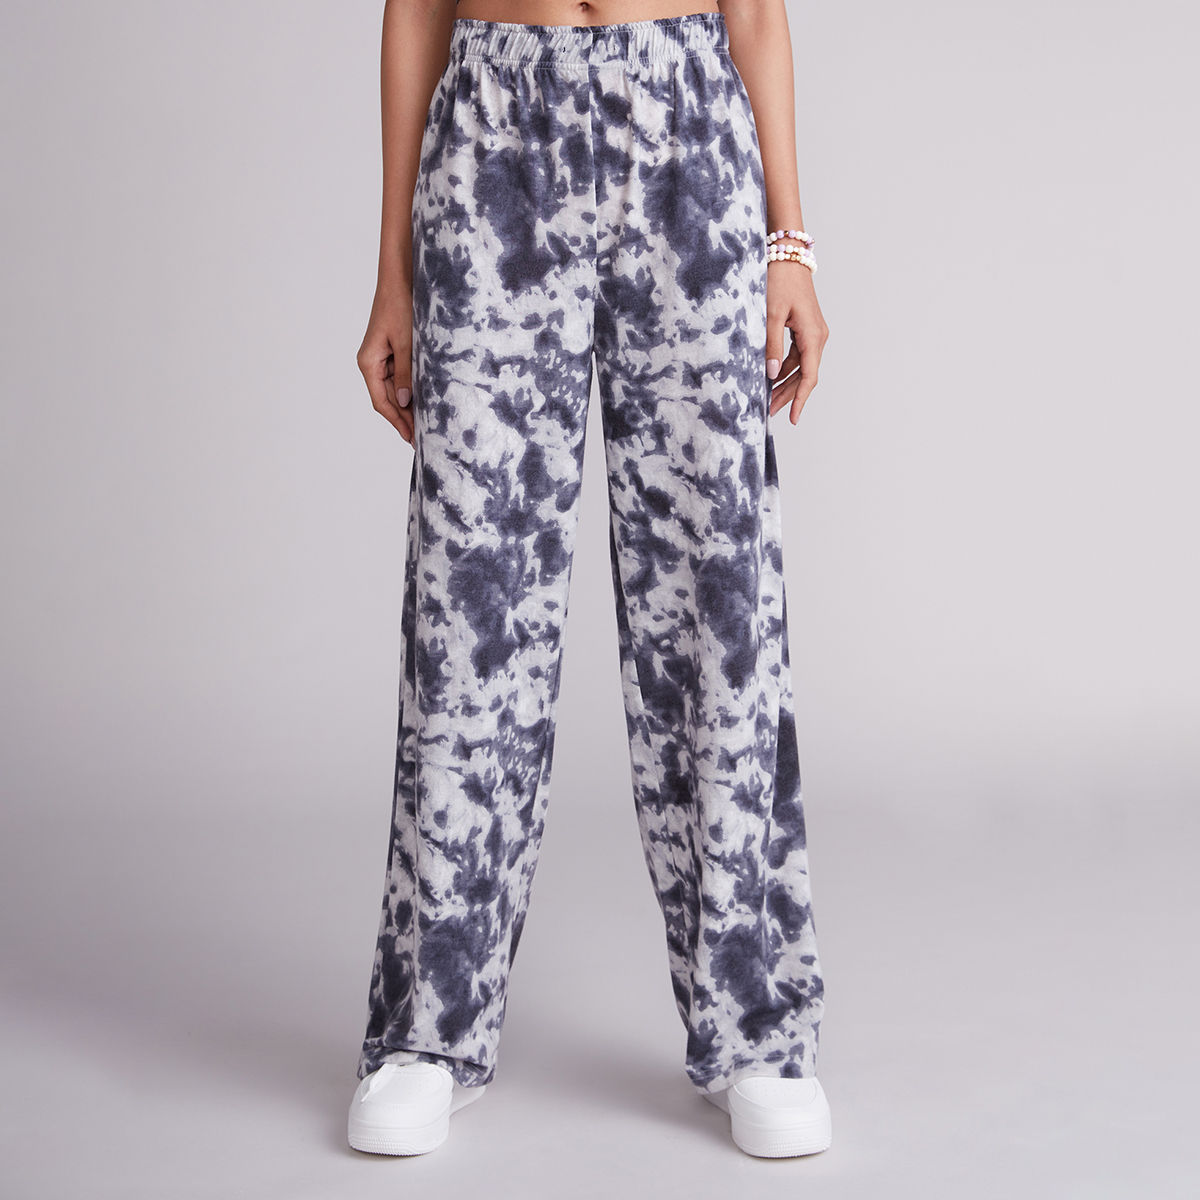 Indian Dobby Bottoms Pants and Trousers  Buy Indian Dobby Handblock Print  Straight Pants Online  Nykaa Fashion